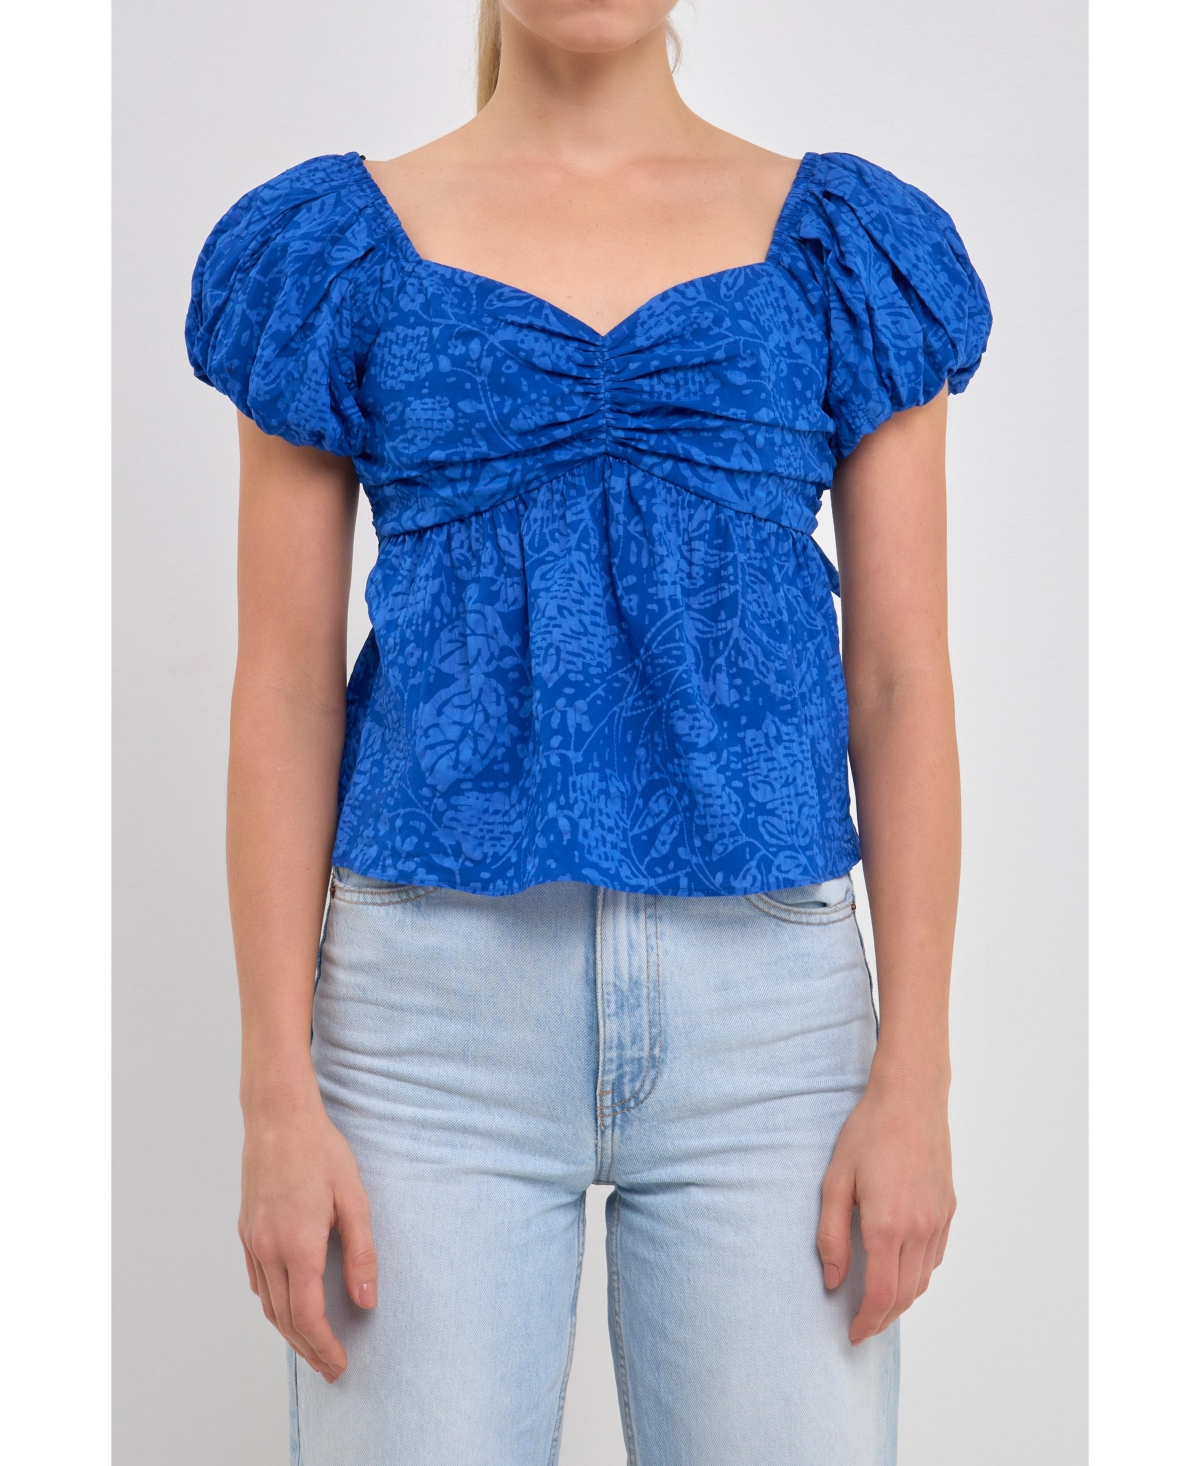 Women's Floral Bow Tied Top - Blue